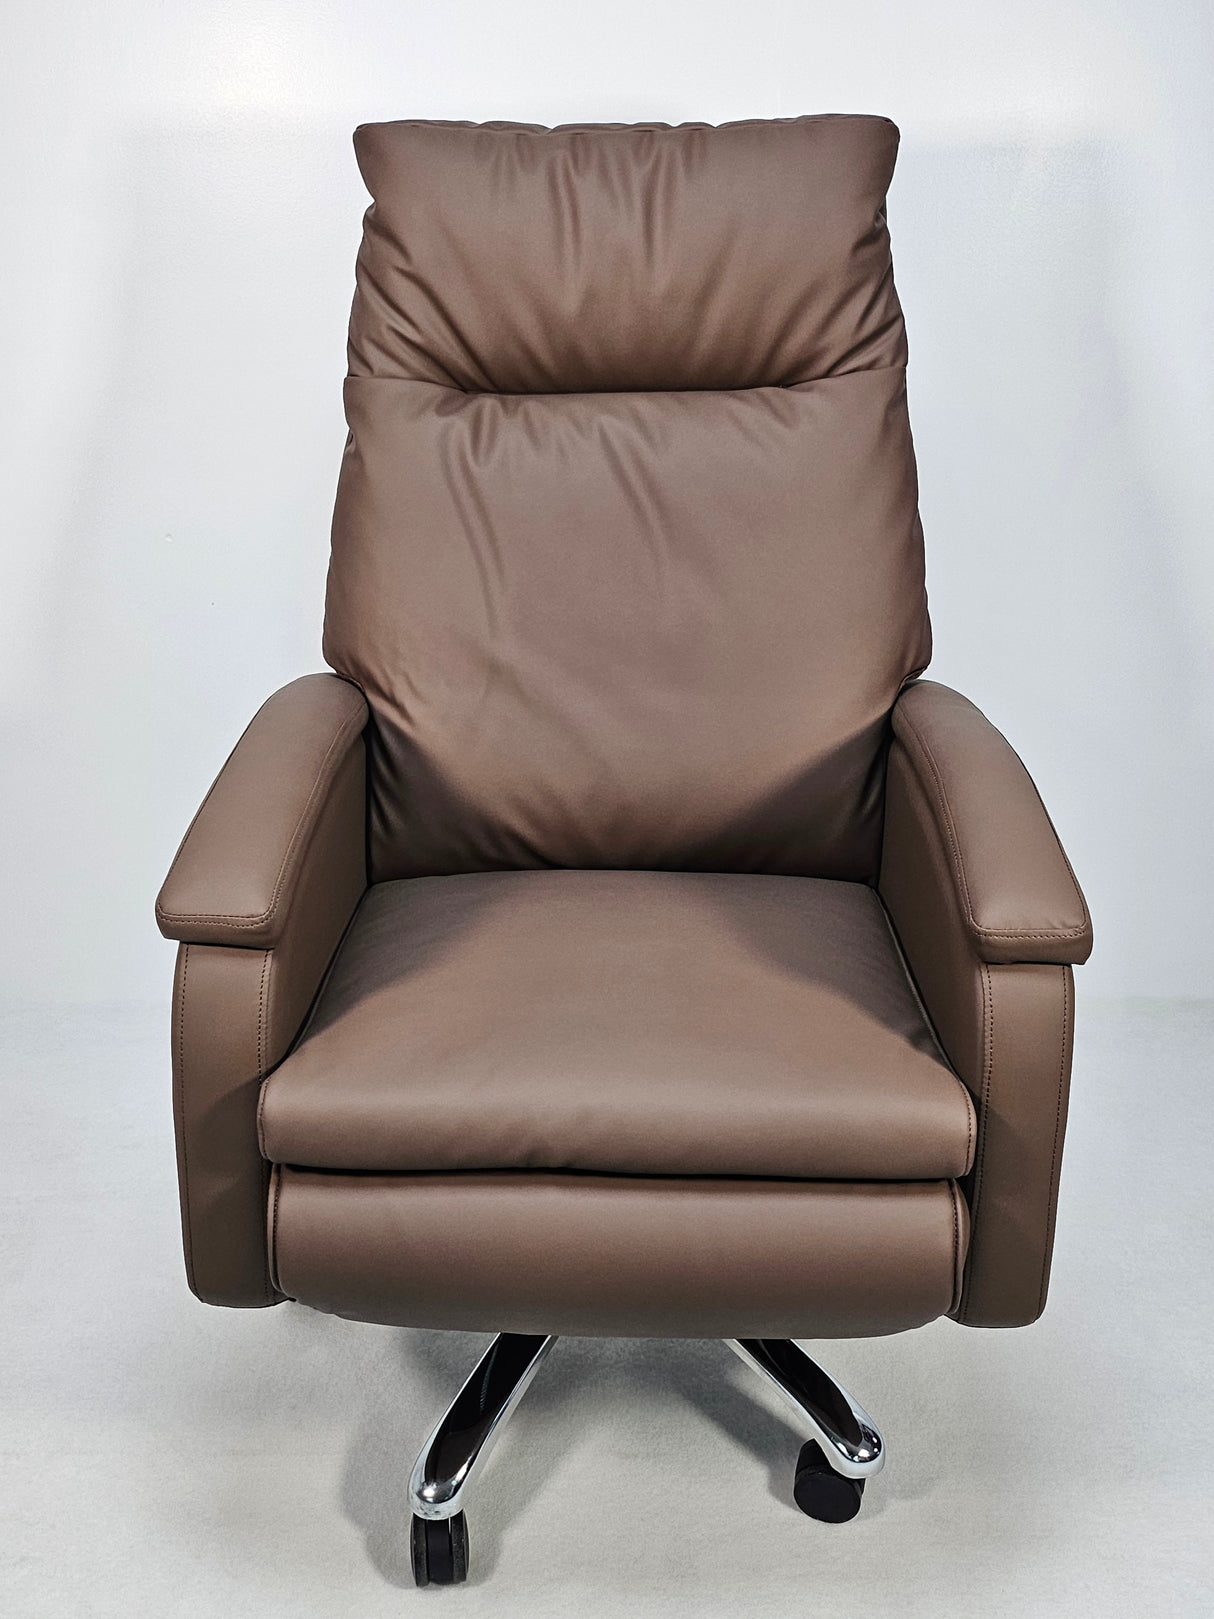 Full Reclining High Back Executive Office Chair in Brown Leather - H004